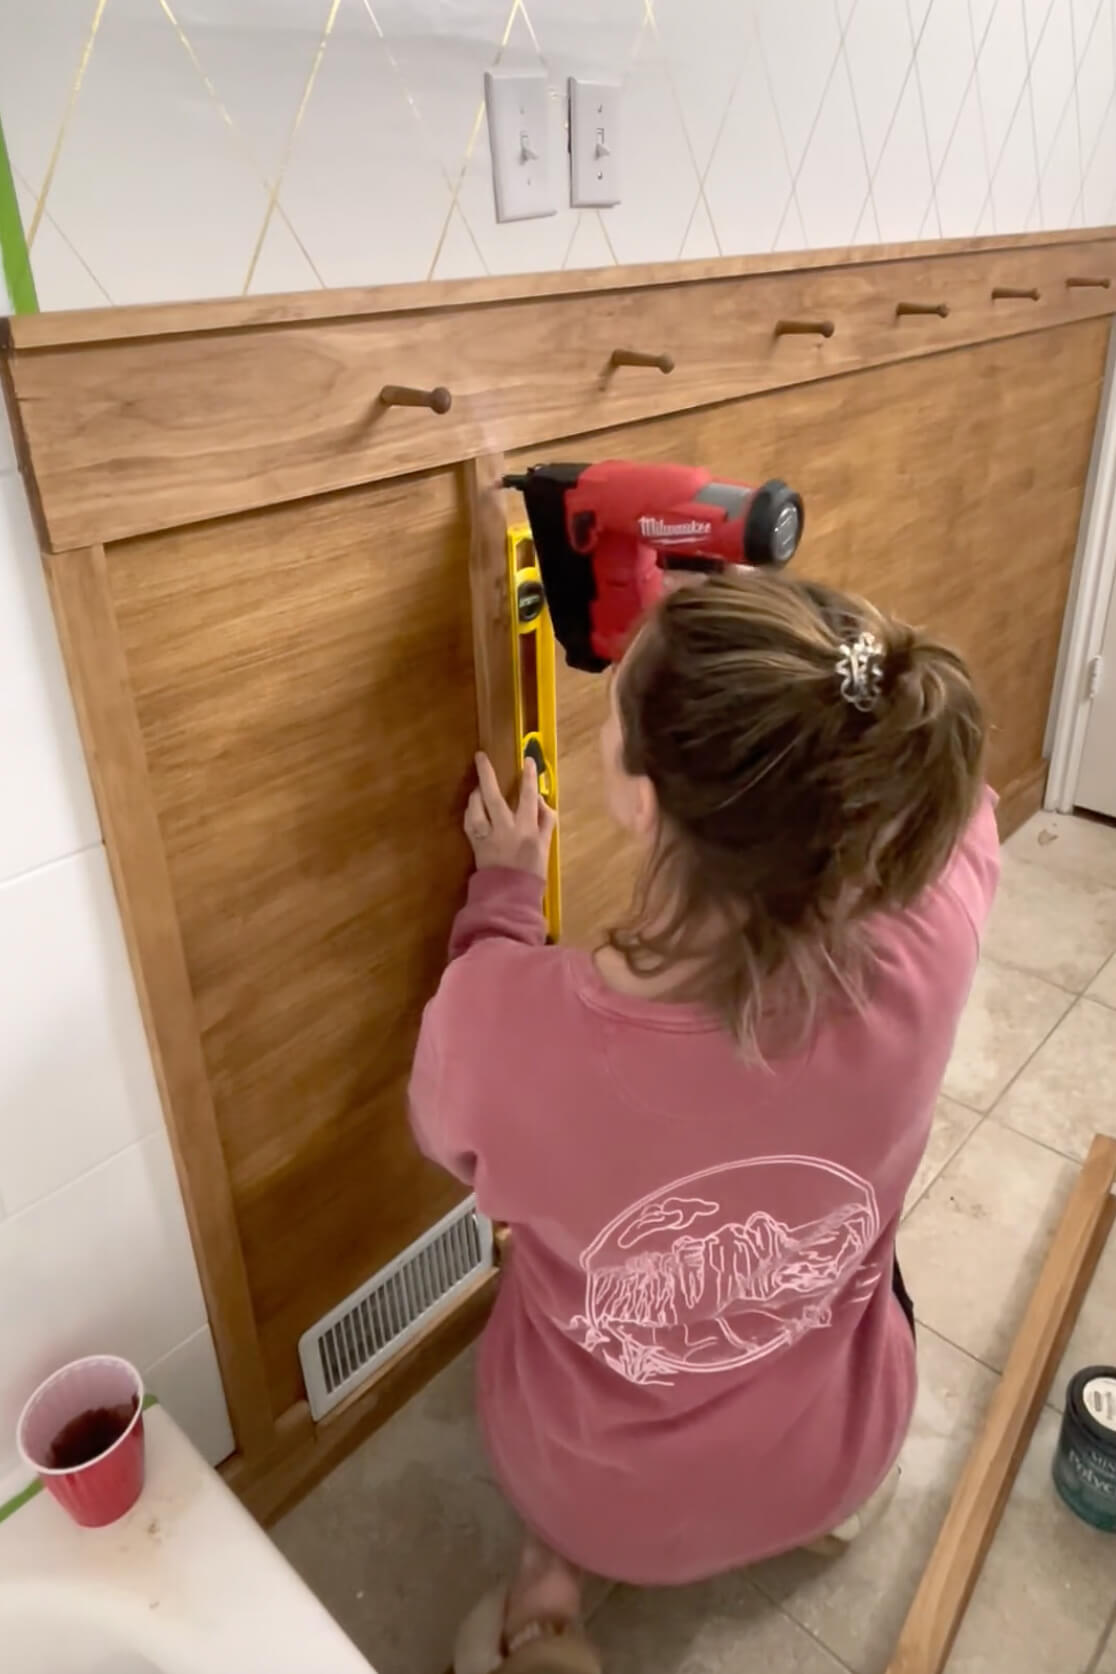 Attaching battens to a board and batten bathroom wall using a brad nailer.